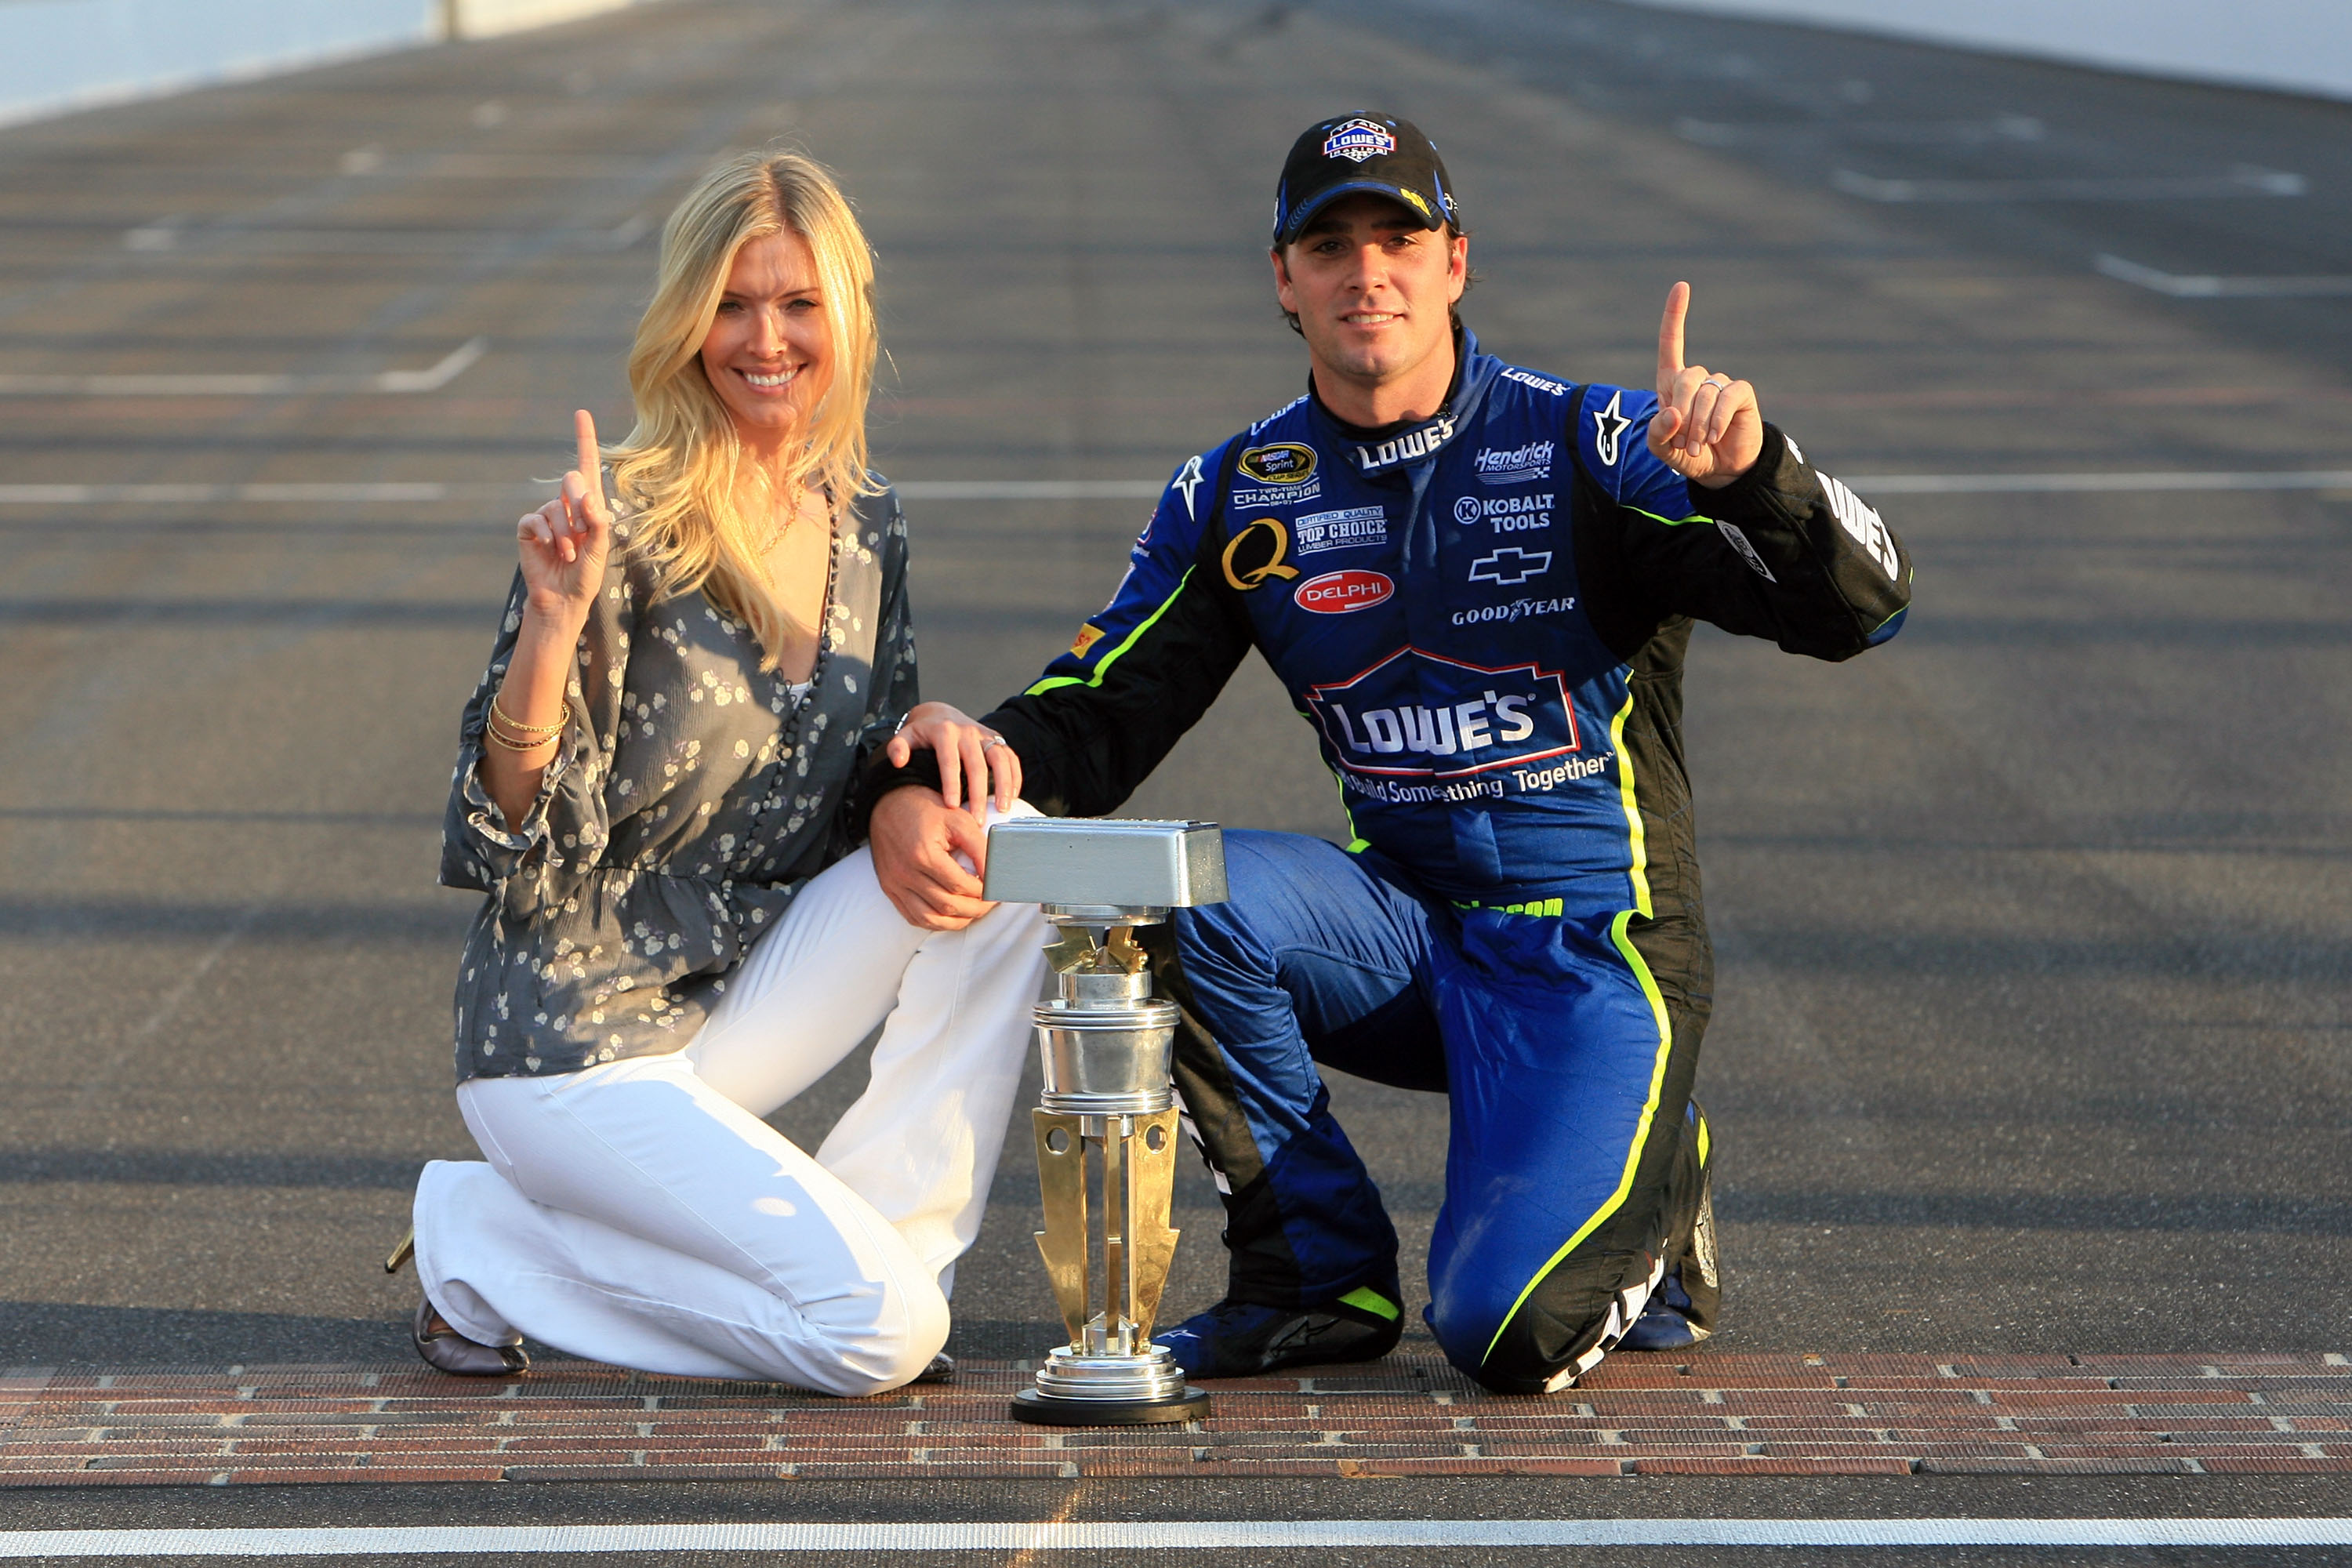 Chandra Janway, Jimmie Johnson's Wife 5 Fast Facts